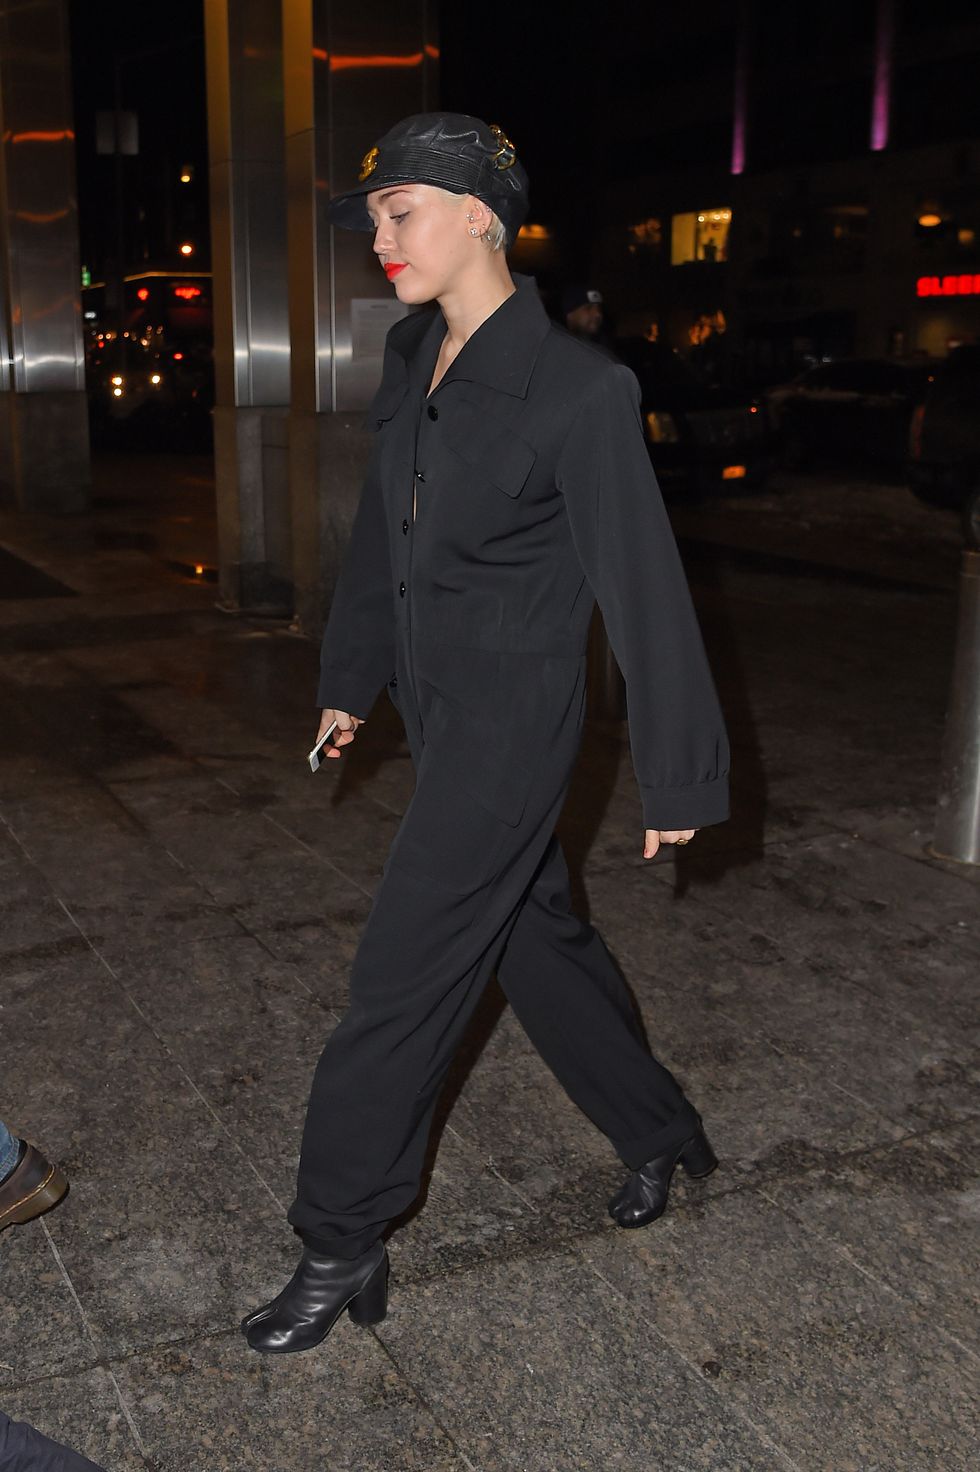 Miley Cyrus in New York wearing a black jumpsuit